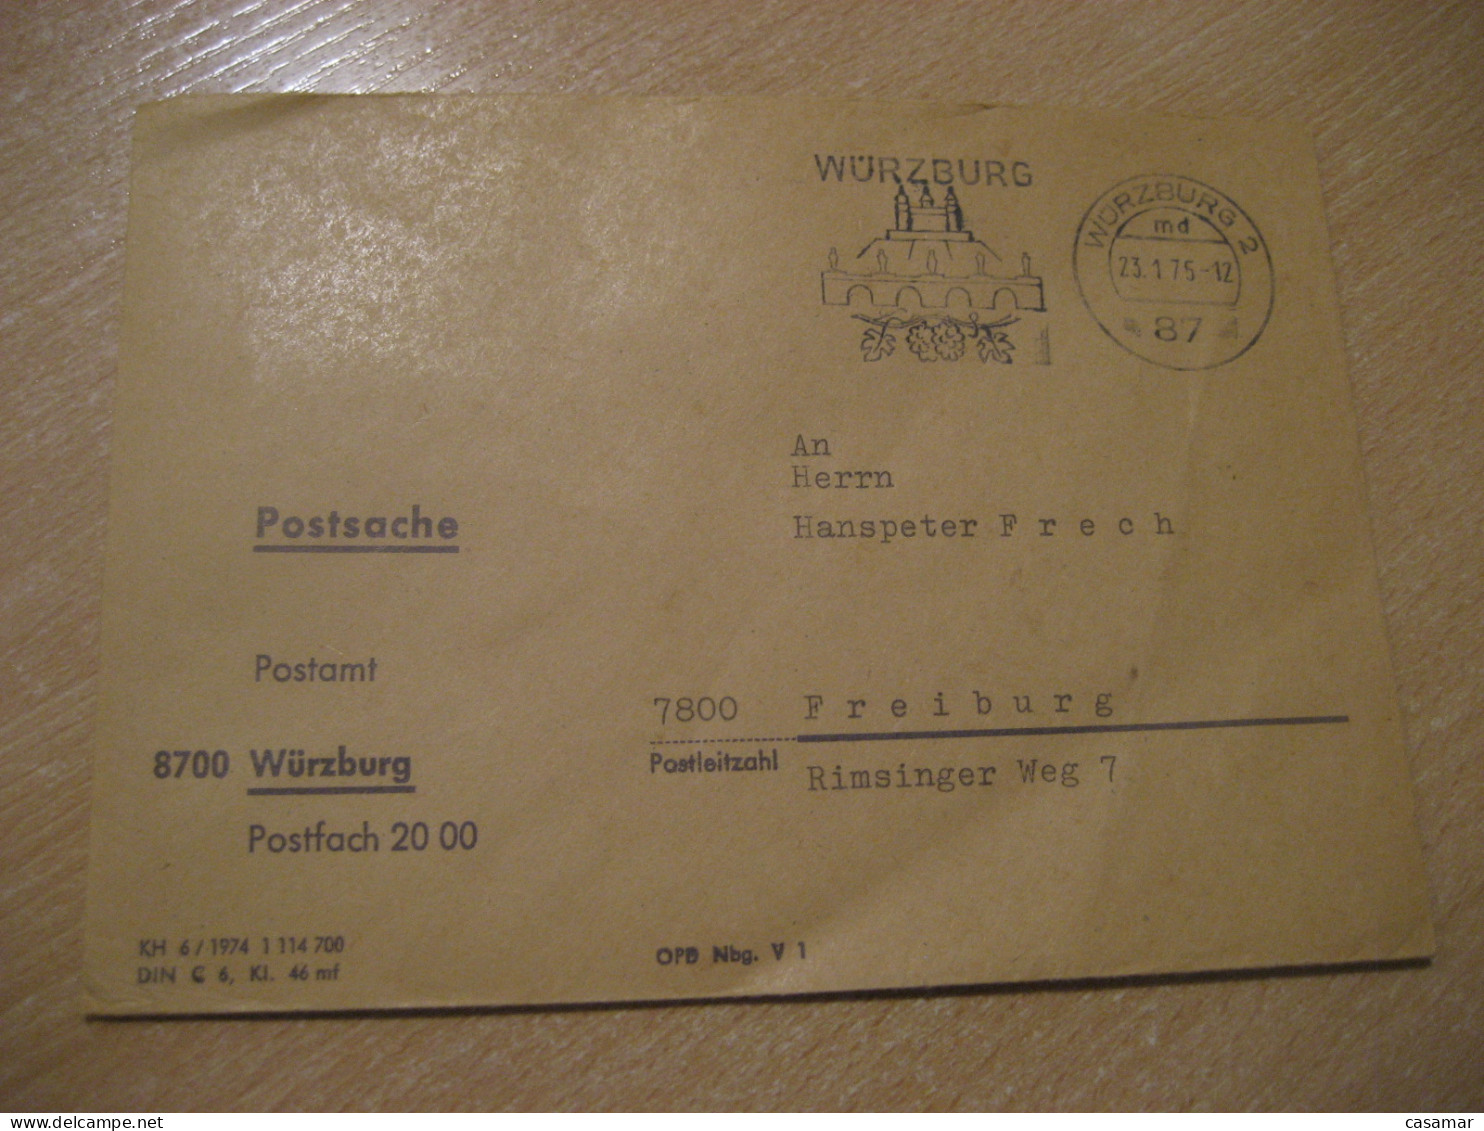 WURZBURG 1975 Bridge To Freiburg Postage Paid Cancel Cover GERMANY - Covers & Documents